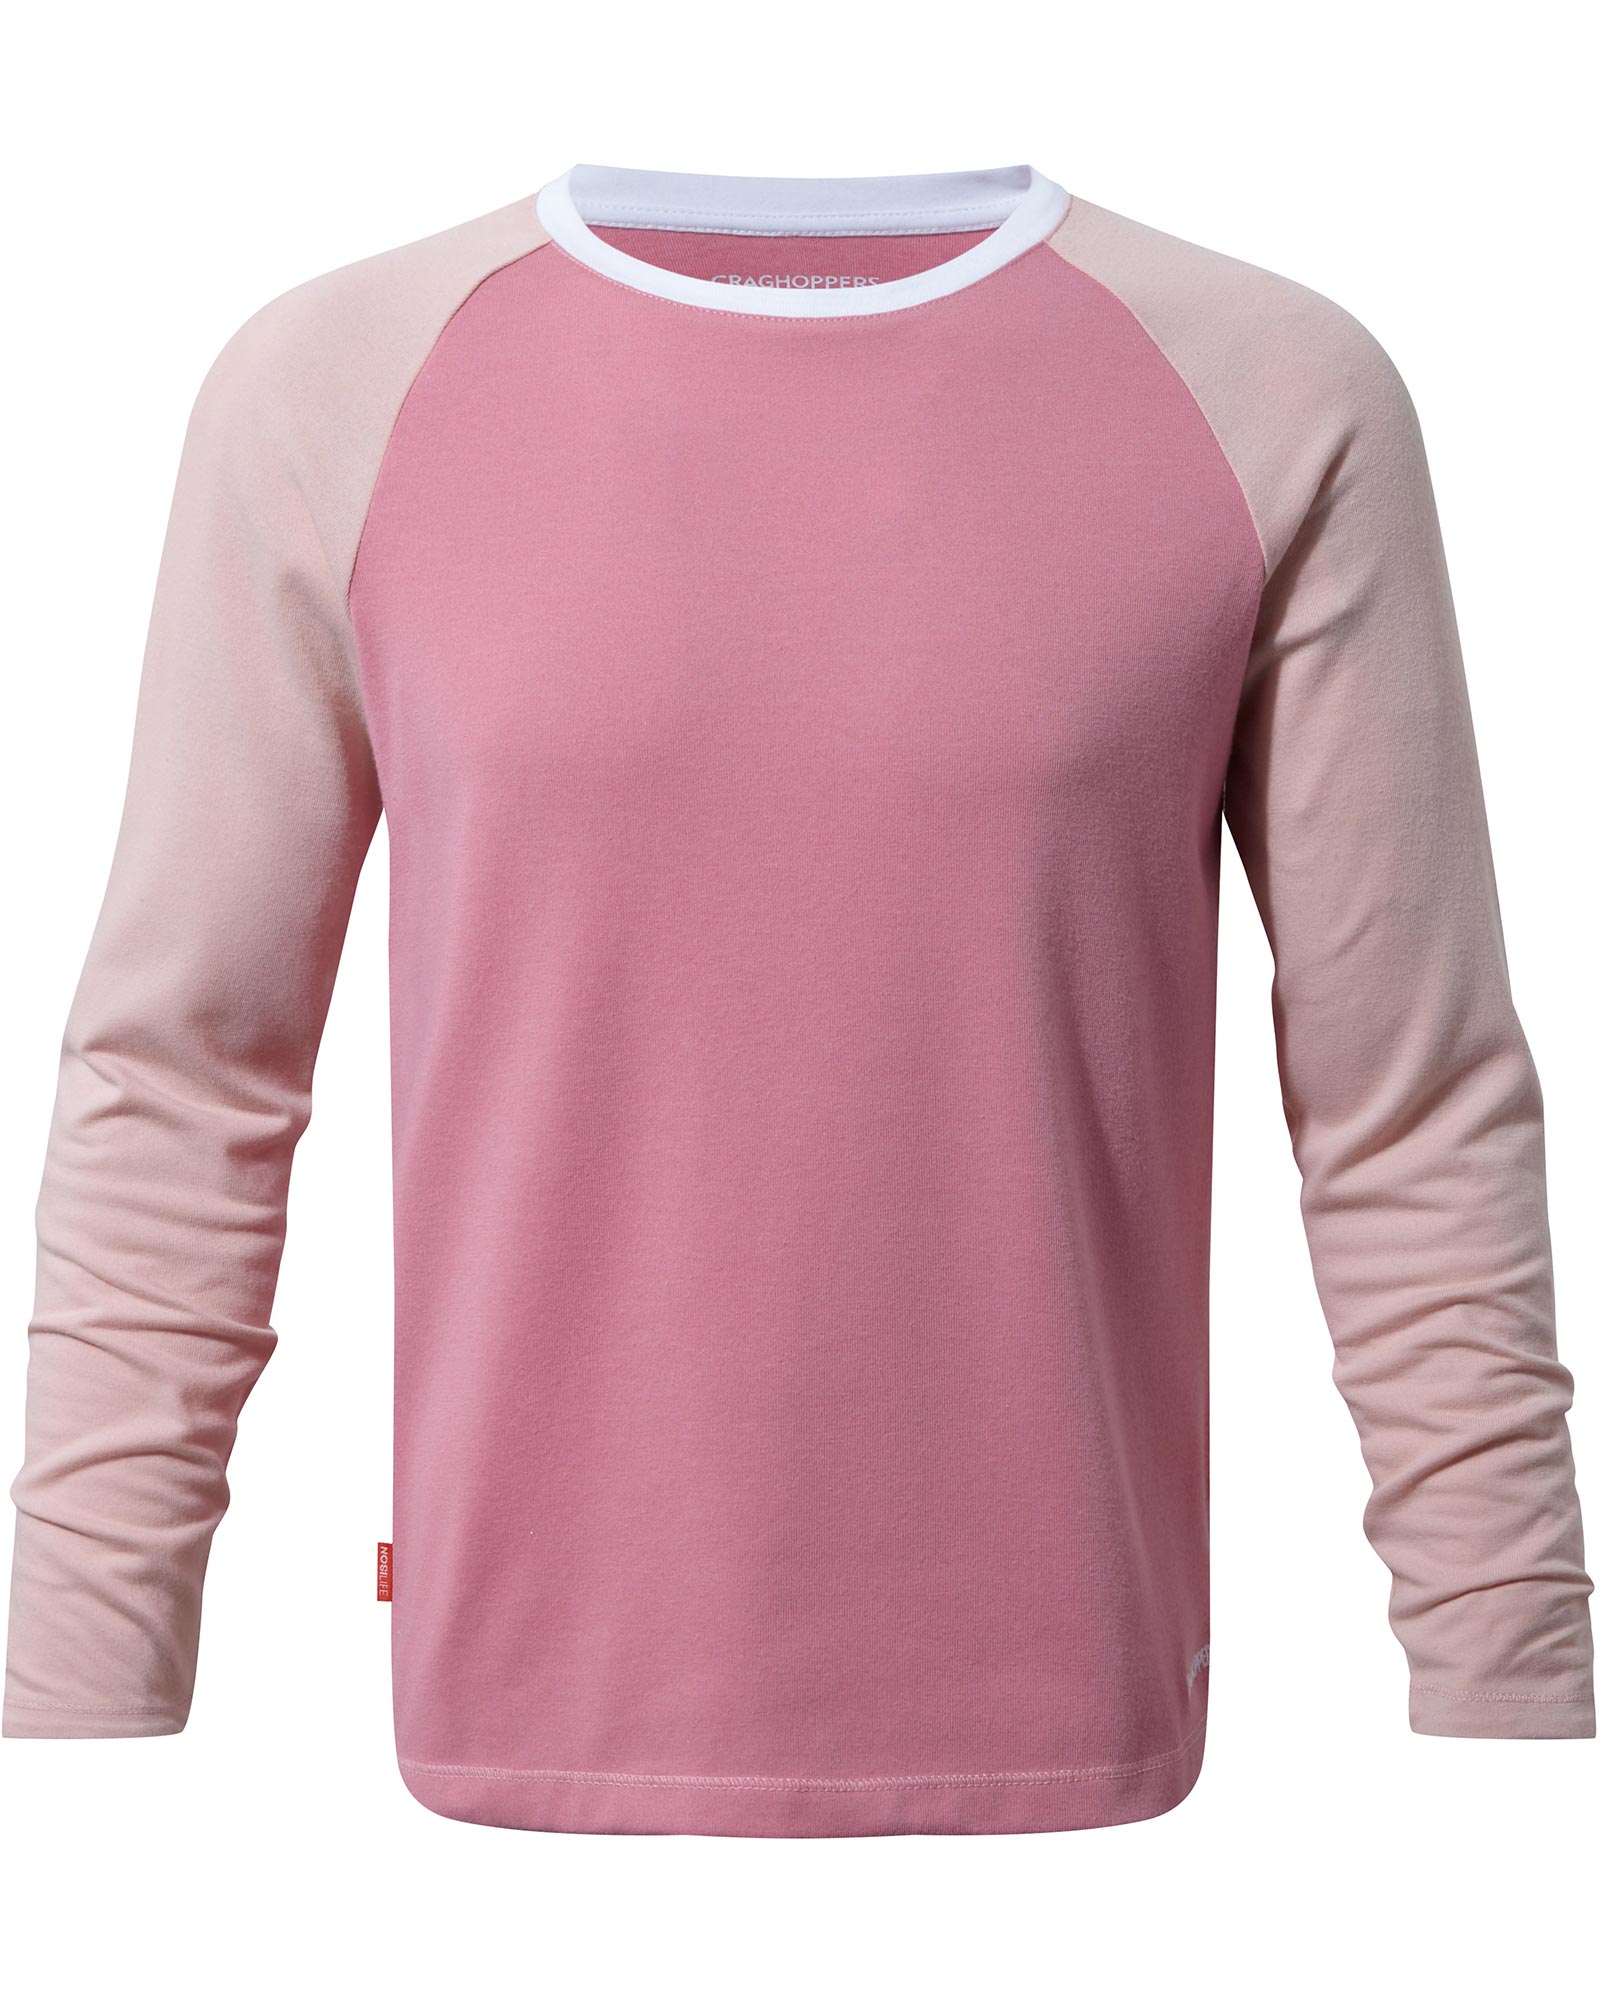 Craghoppers NosiLife Barnaby Kids’ Long Sleeve T Shirt - English Rose 13 Years